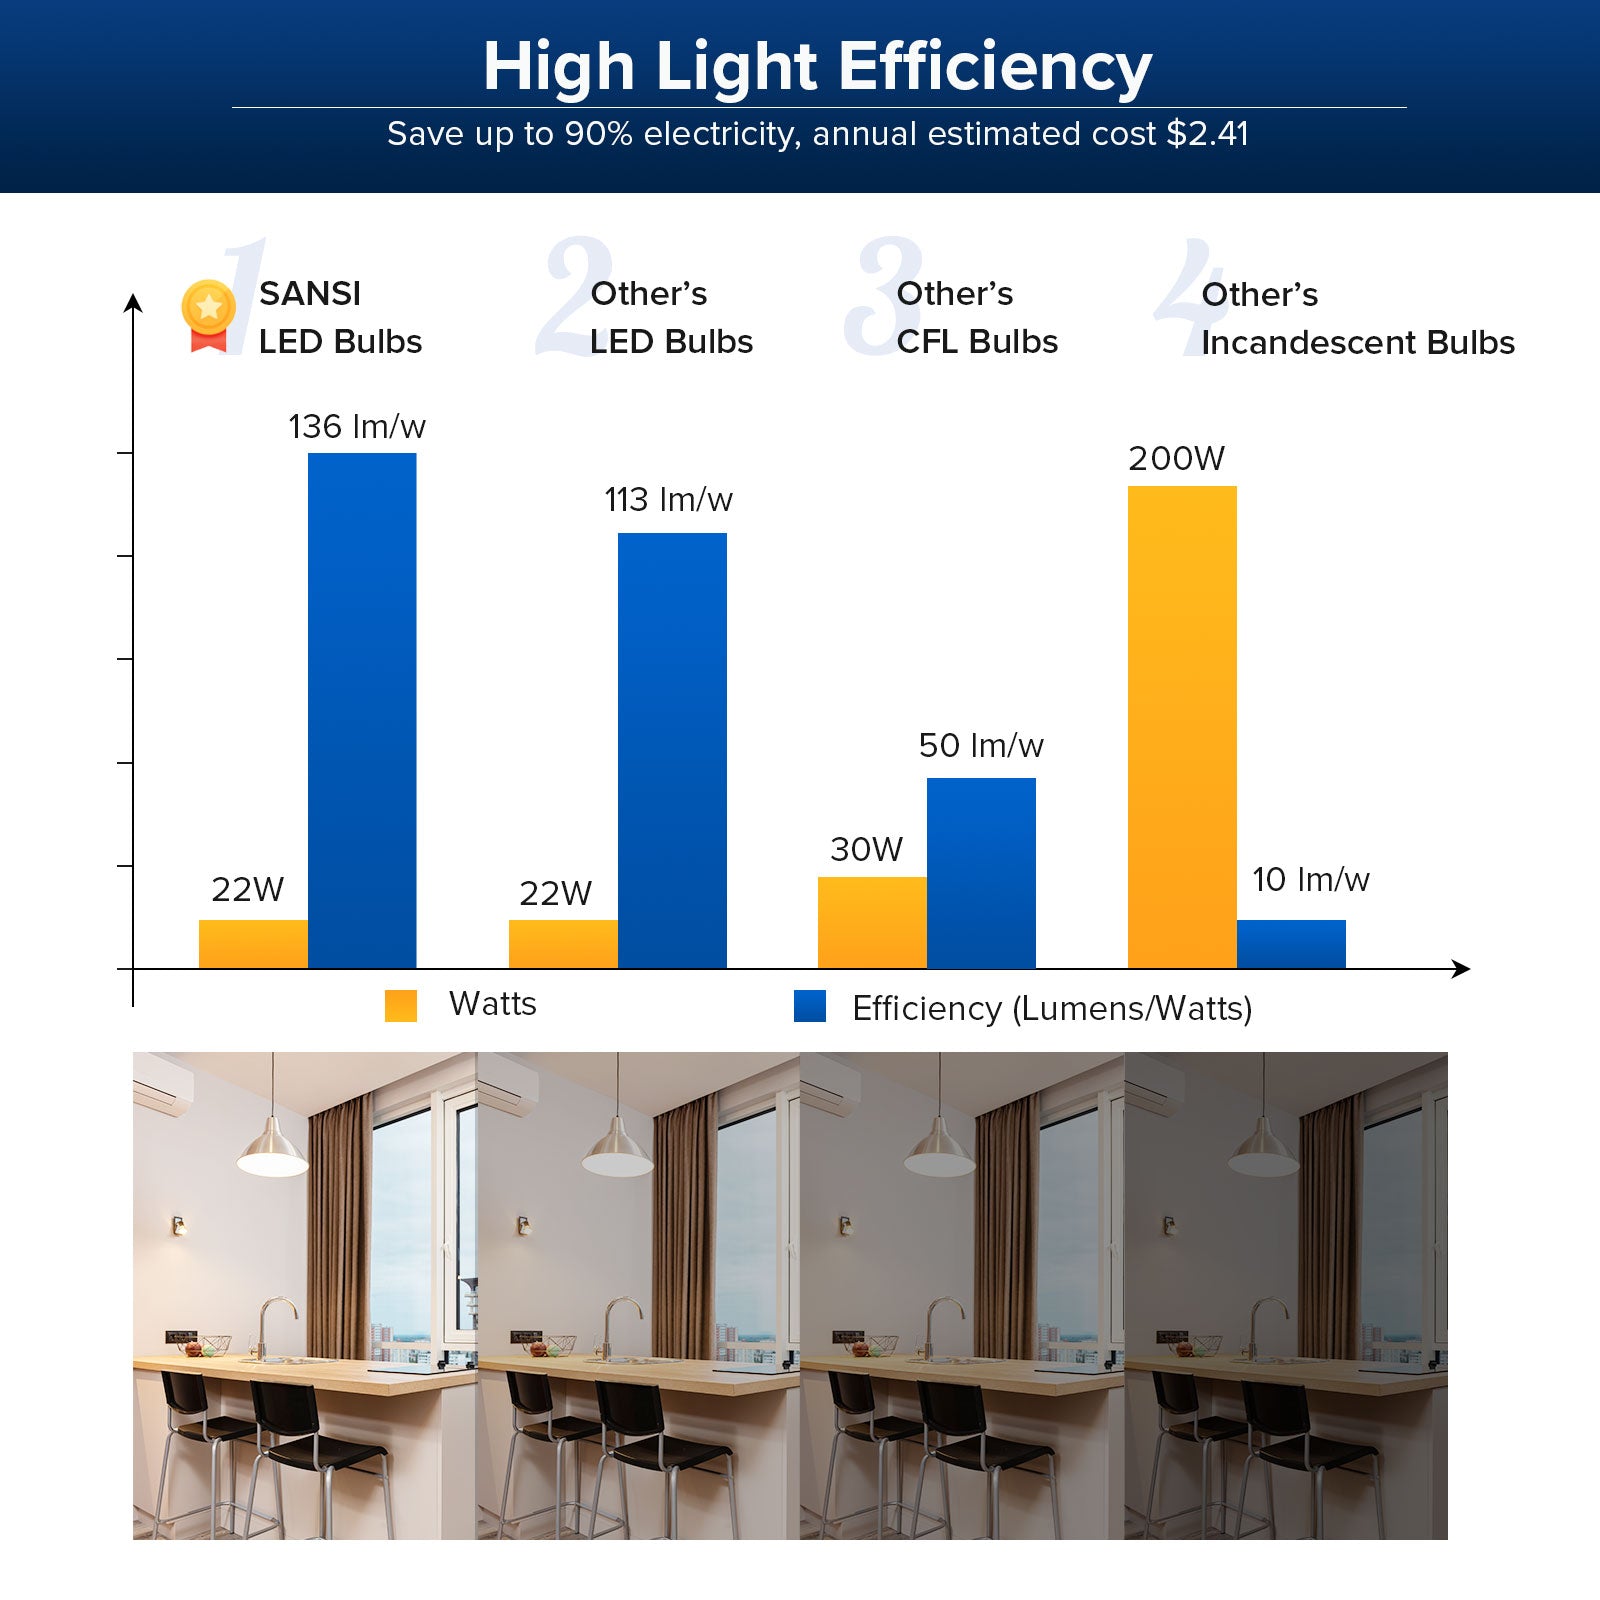 A21 22W LED 3000K/5000K Light Bulb has high light efficiency，save up to 90% electricity, annual estimated cost $2.41.